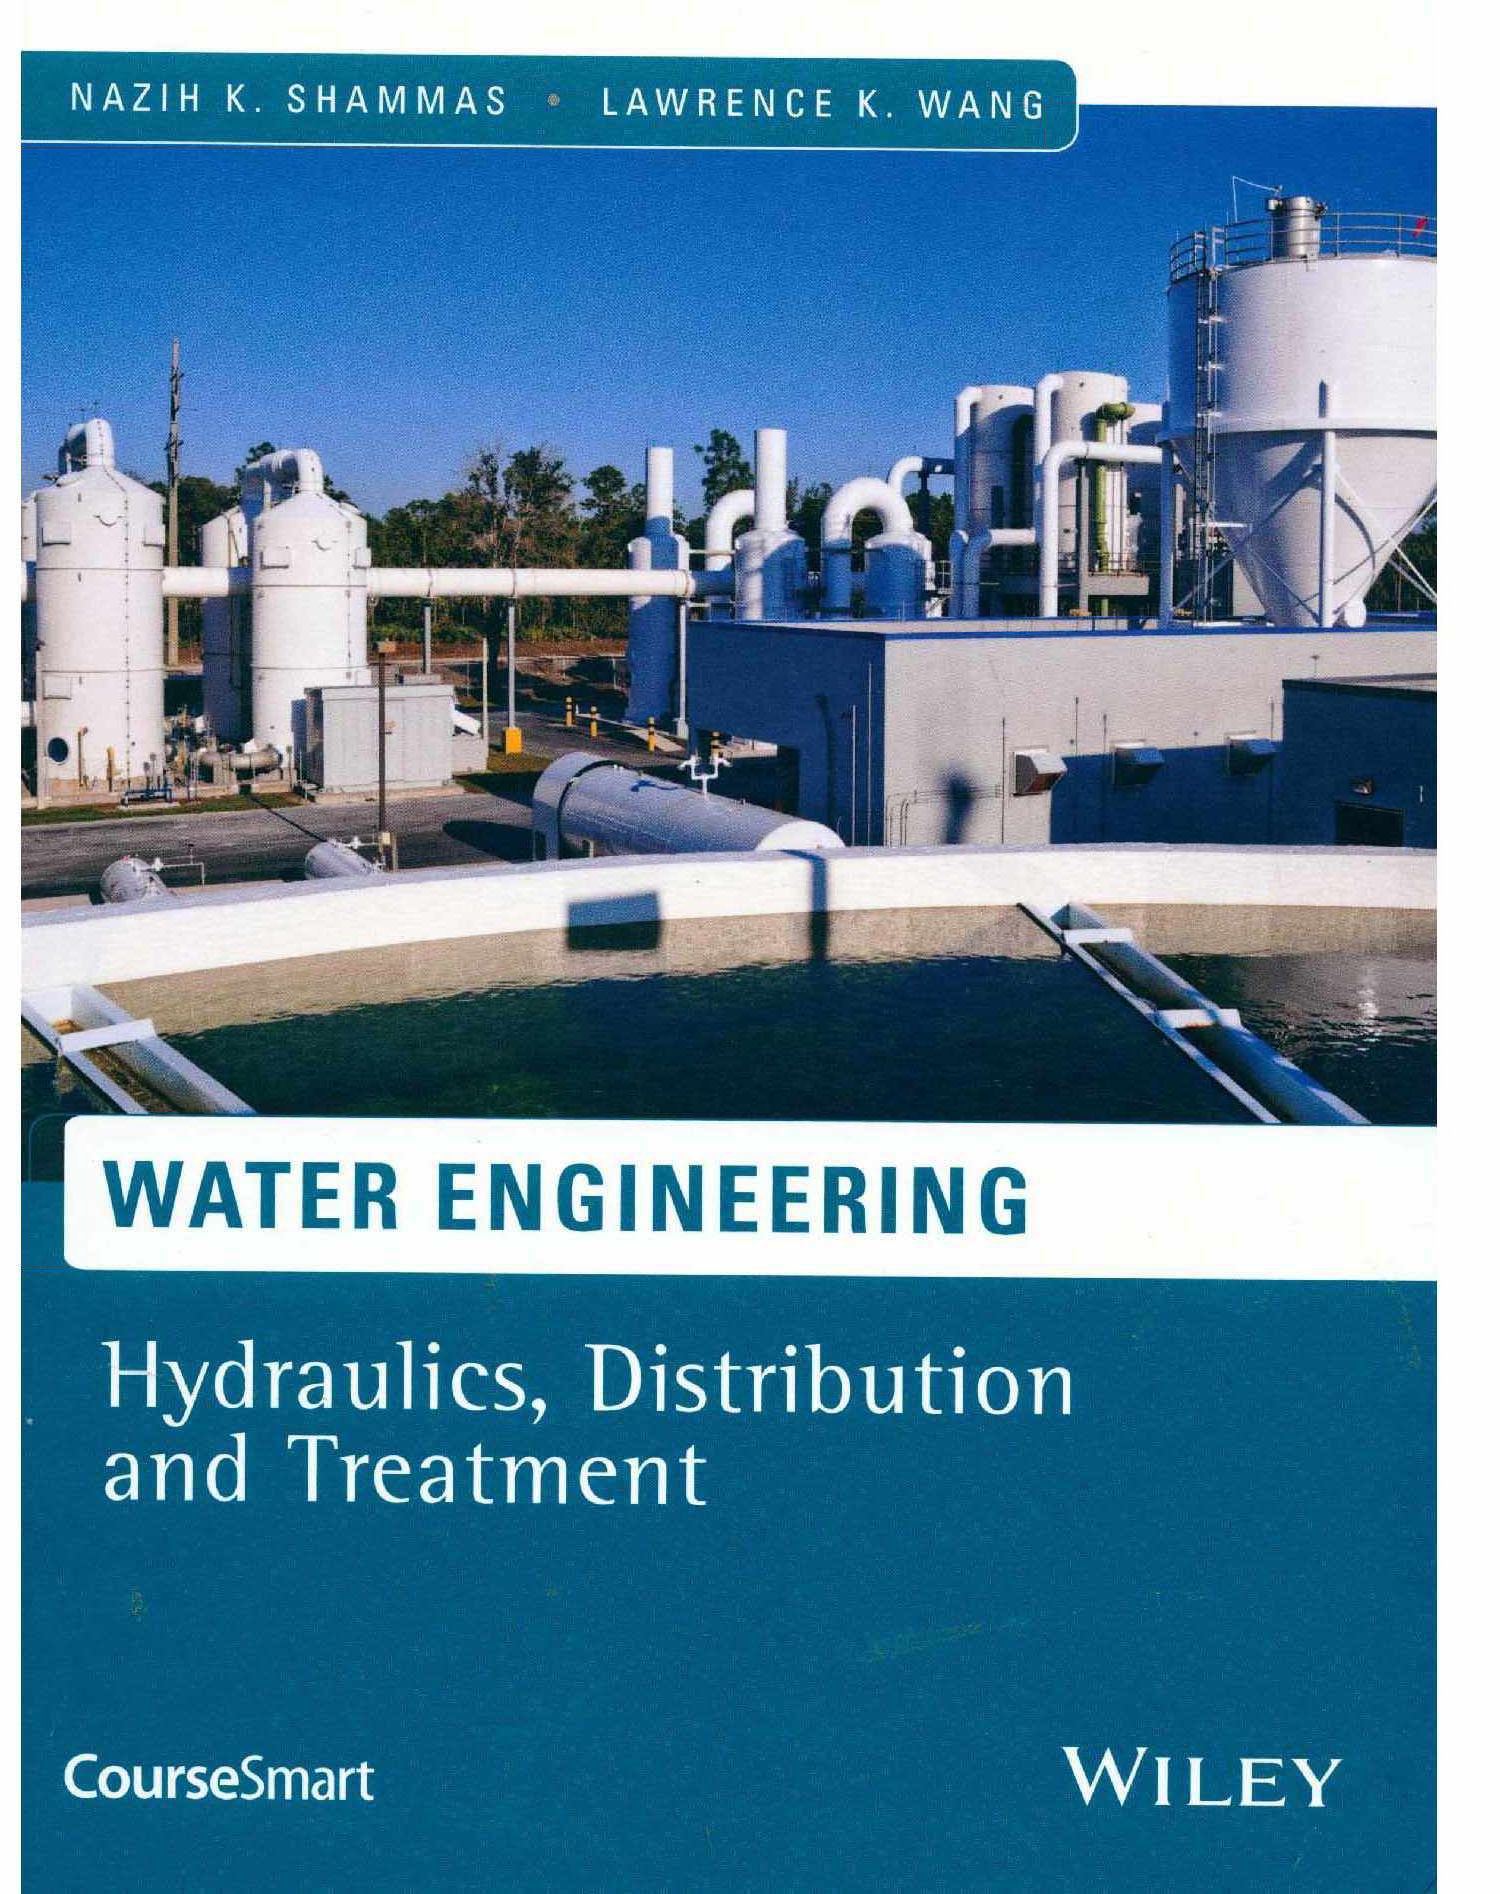 Water engineering: hydraulics, distribution and treatment